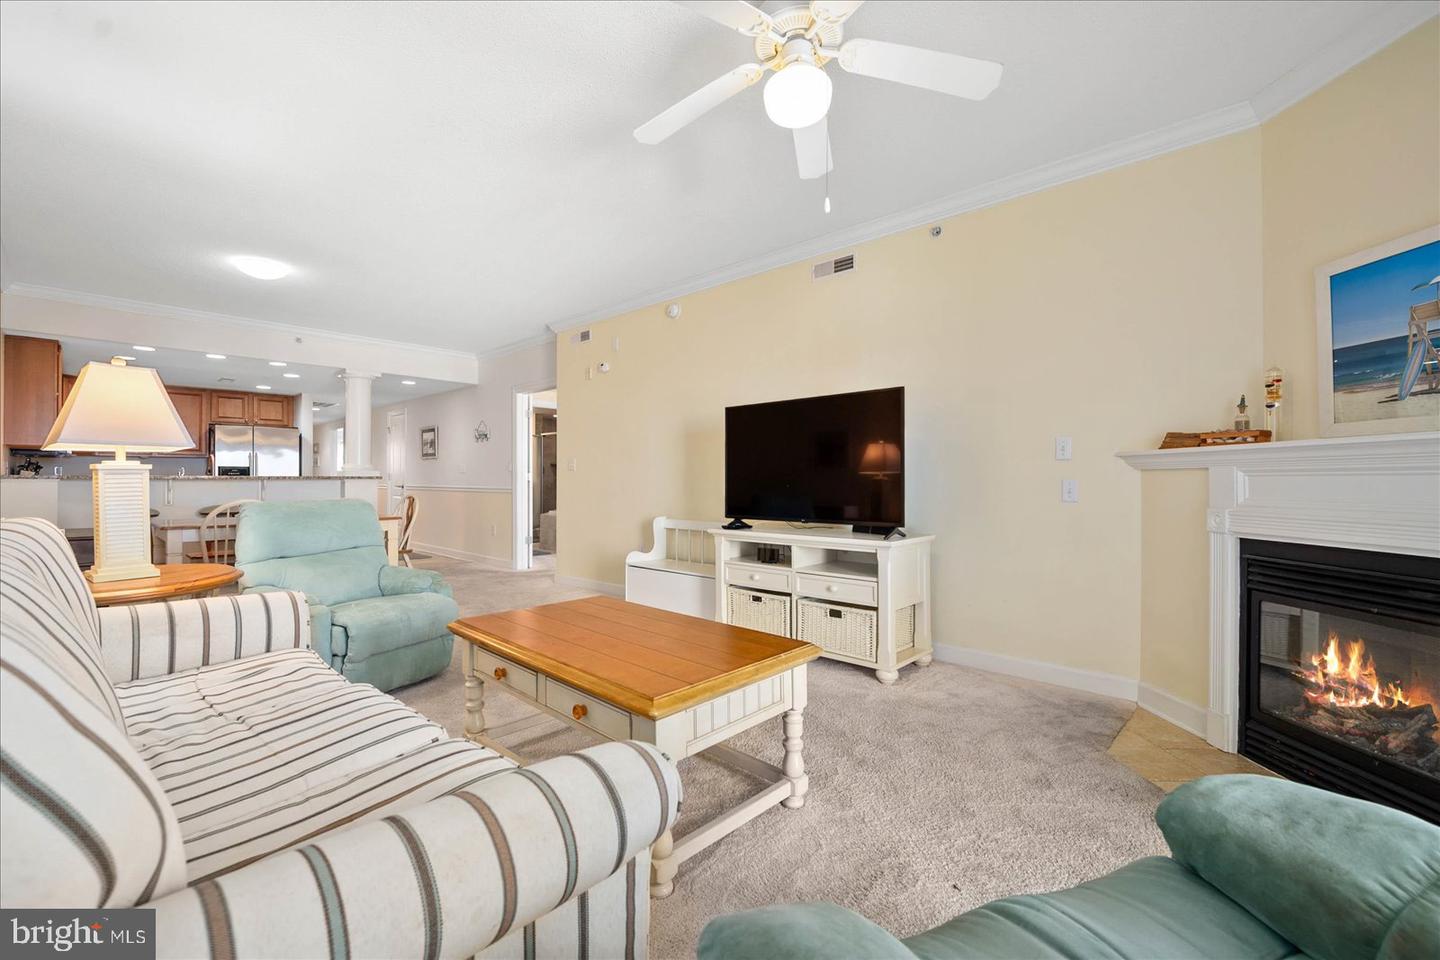 MDWO2019672-802922312930-2024-03-15-14-18-06 300 17th St #303 | Ocean City, MD Real Estate For Sale | MLS# Mdwo2019672  - 1st Choice Properties